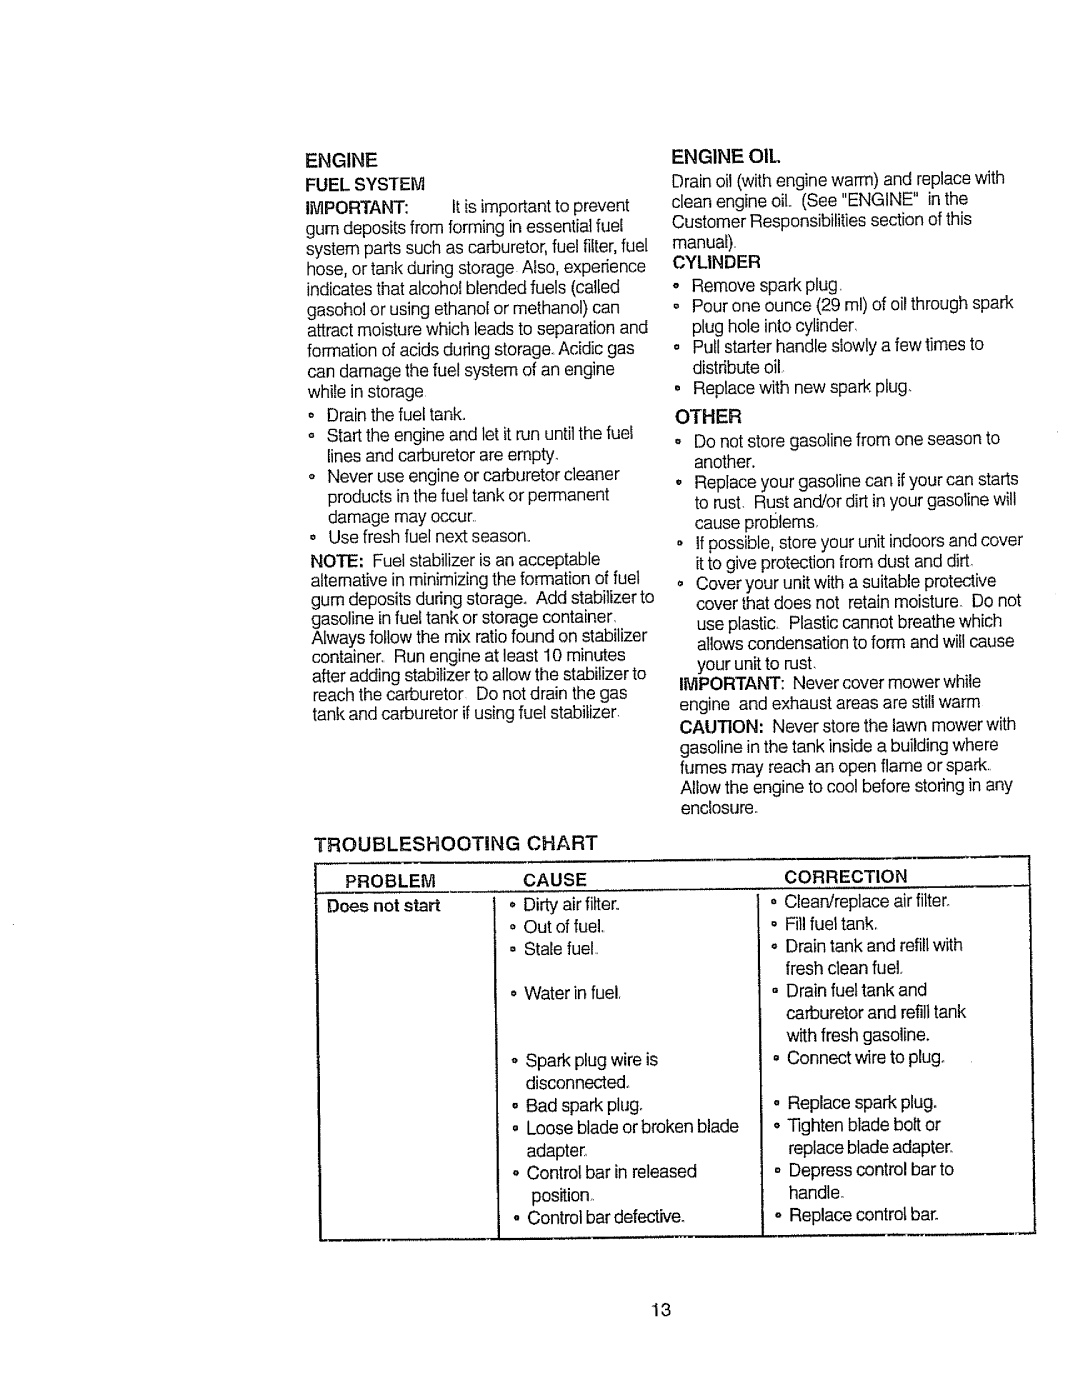 Craftsman 917.38721 owner manual Other, Troubleshooting Chart, Engine Fuel System, Doesnots 